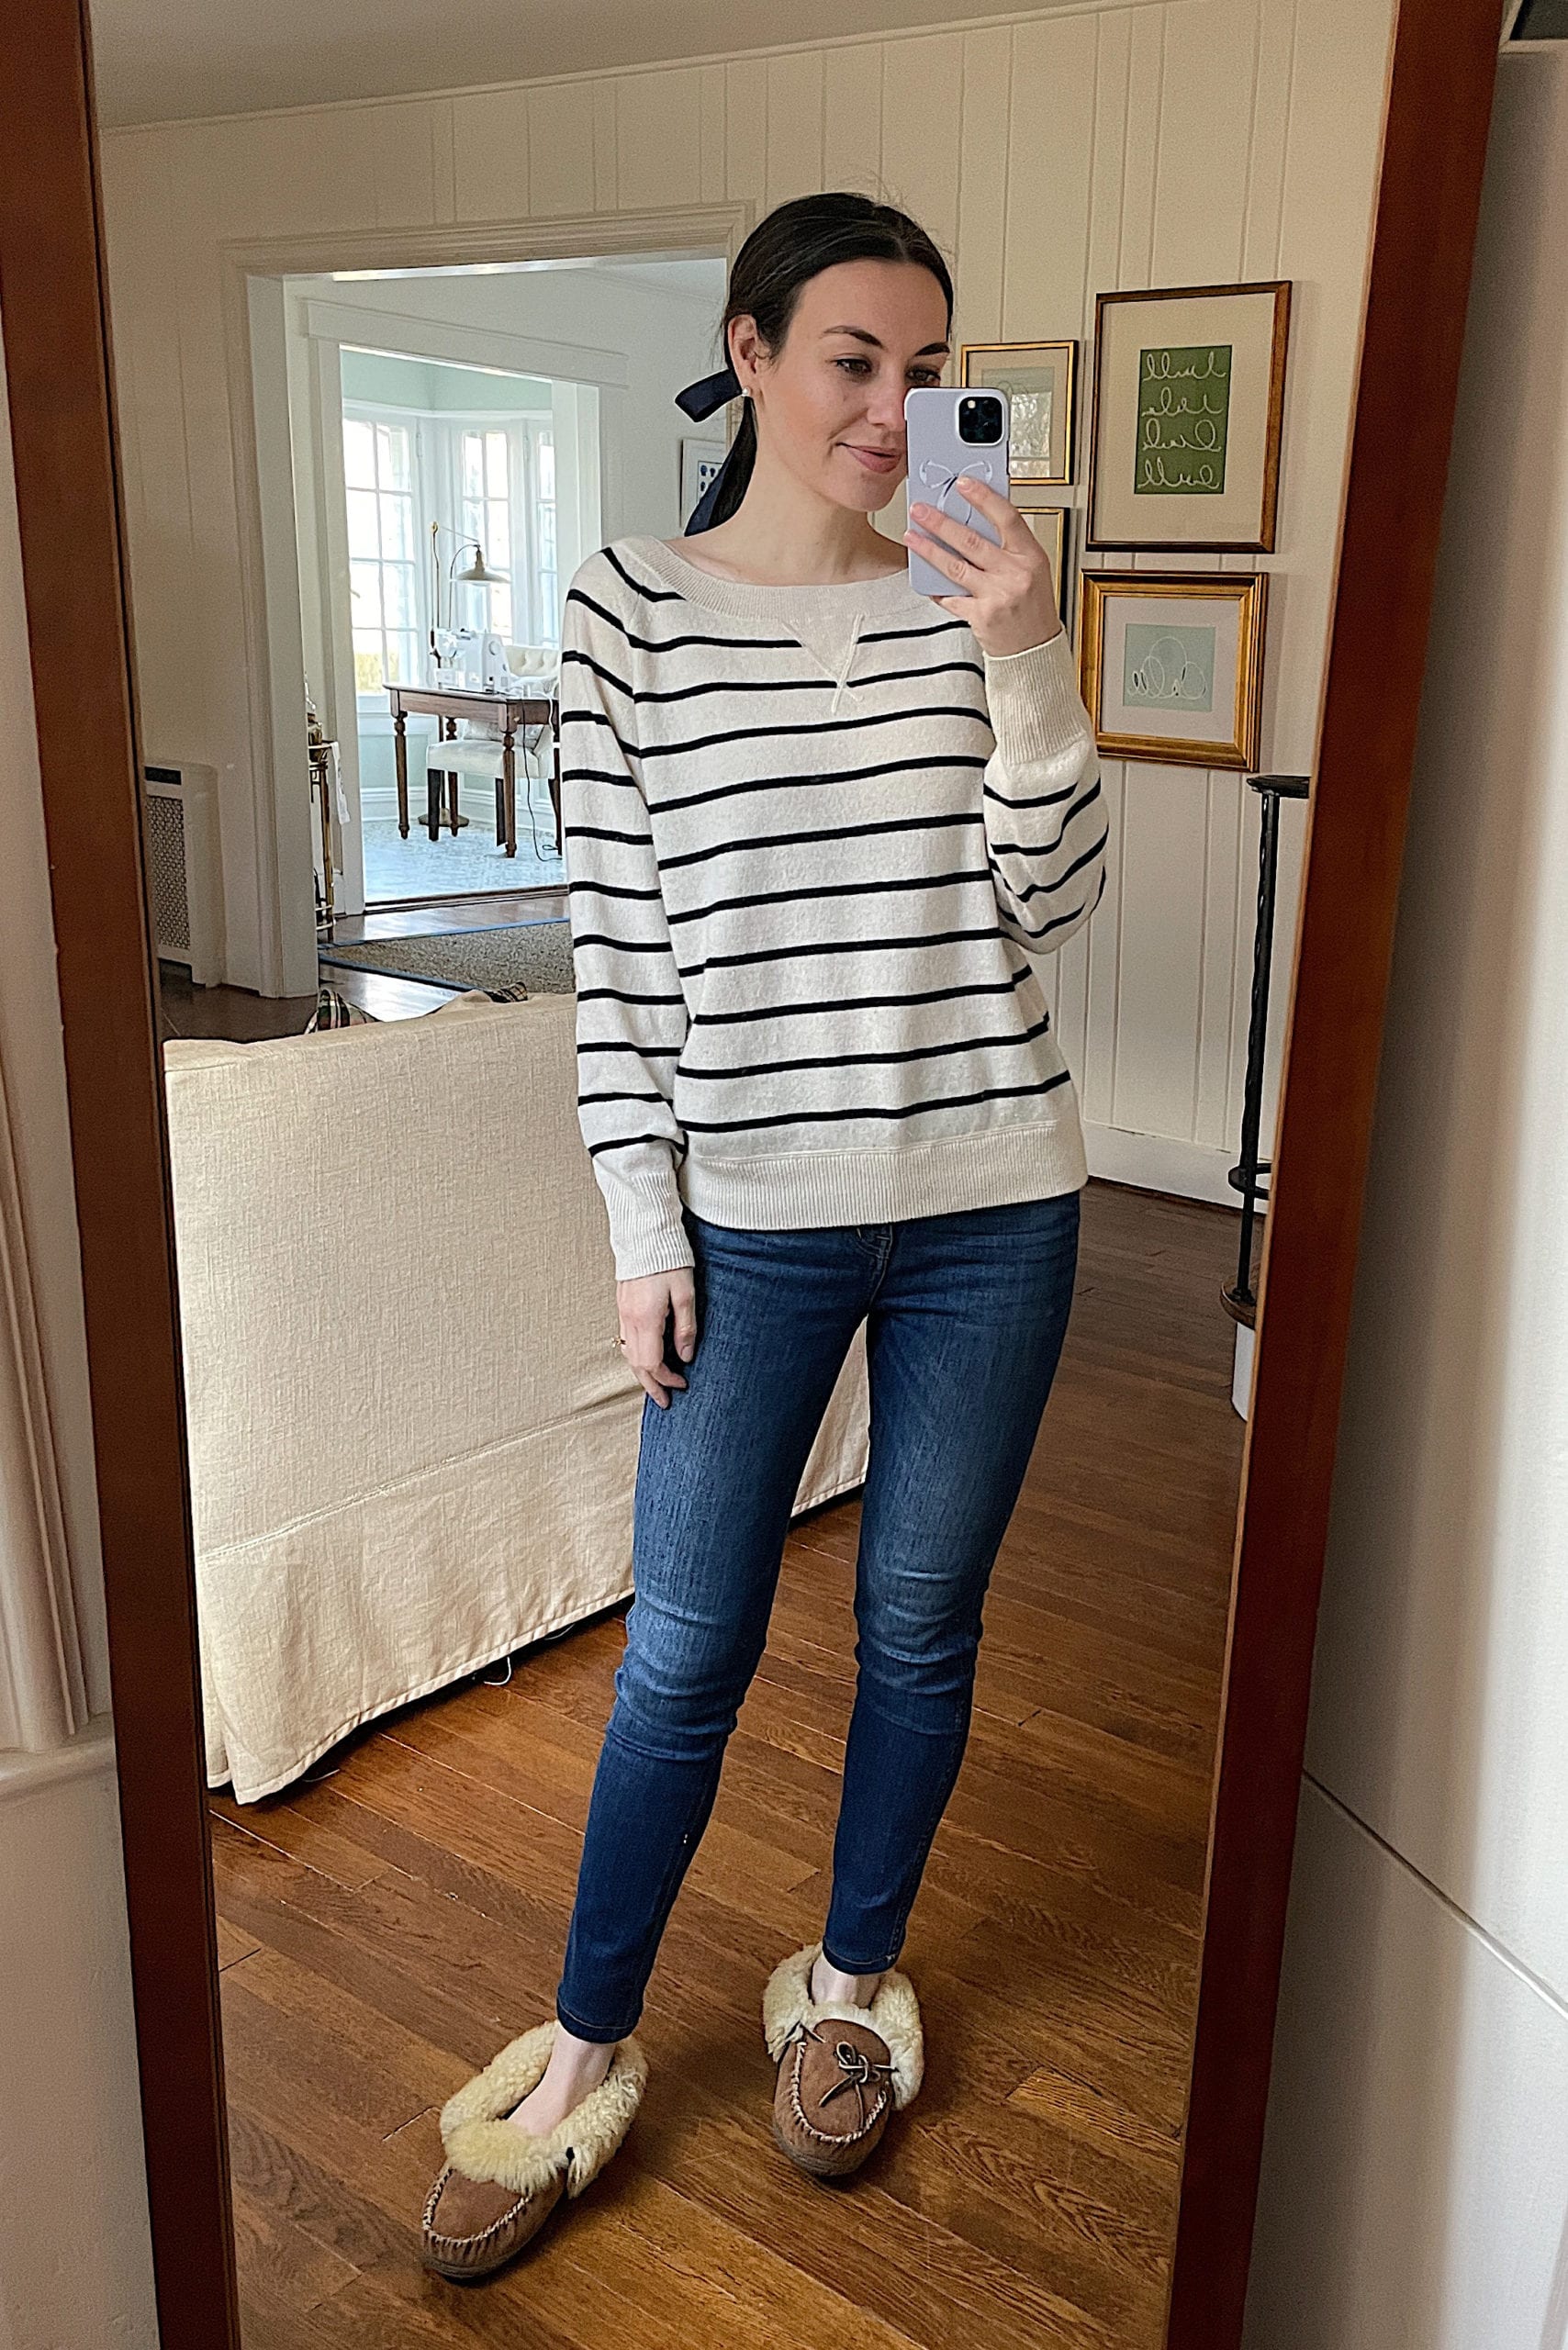 WEEK OF OUTFITS 12.15.20